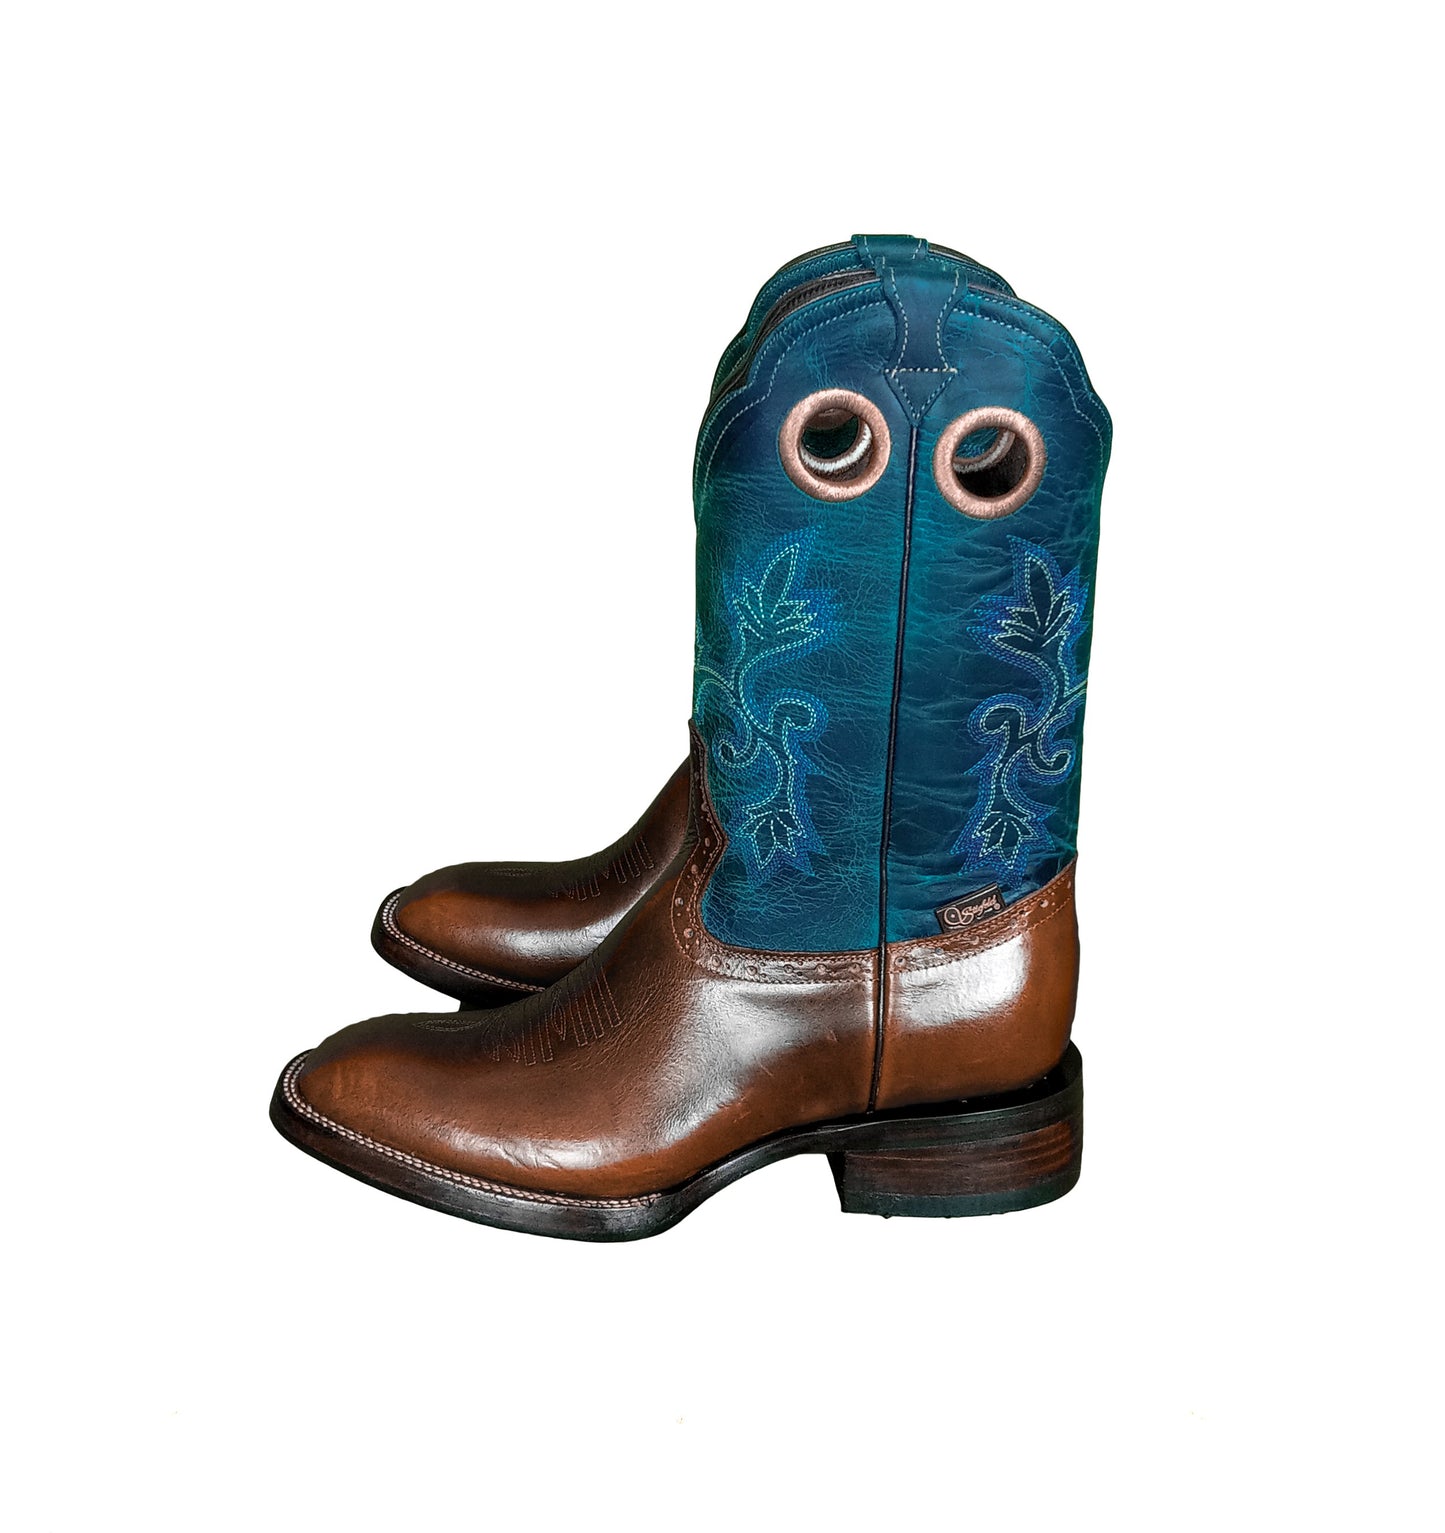 The Theodore Boot